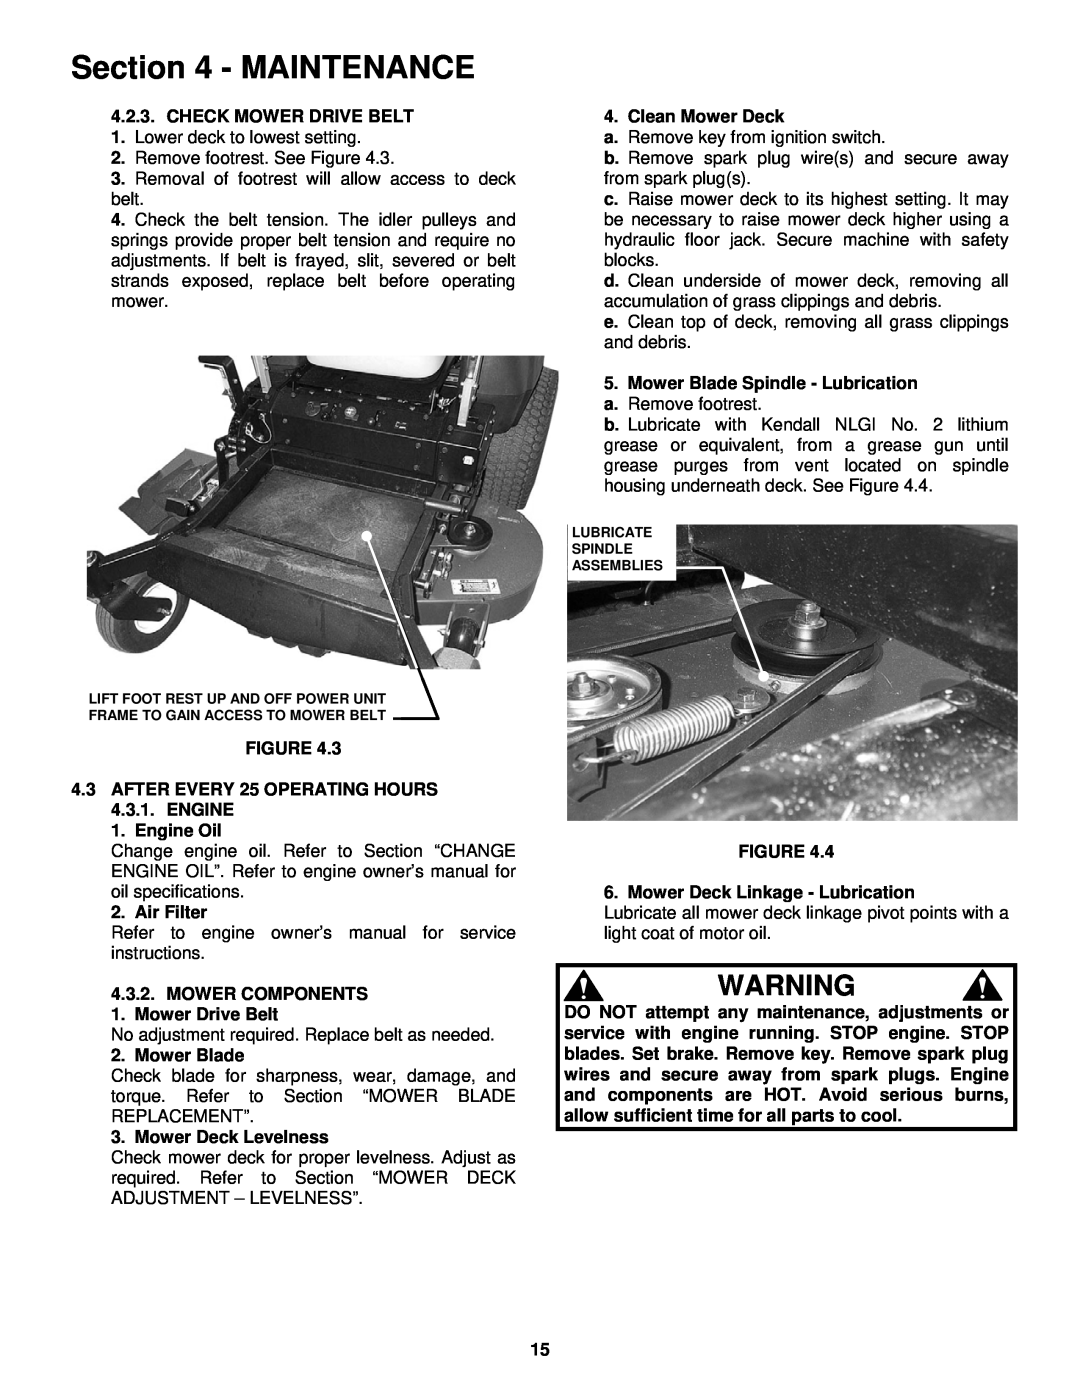 Snapper NZM19481KWV important safety instructions Maintenance, CHECK MOWER DRIVE BELT 1. Lower deck to lowest setting 